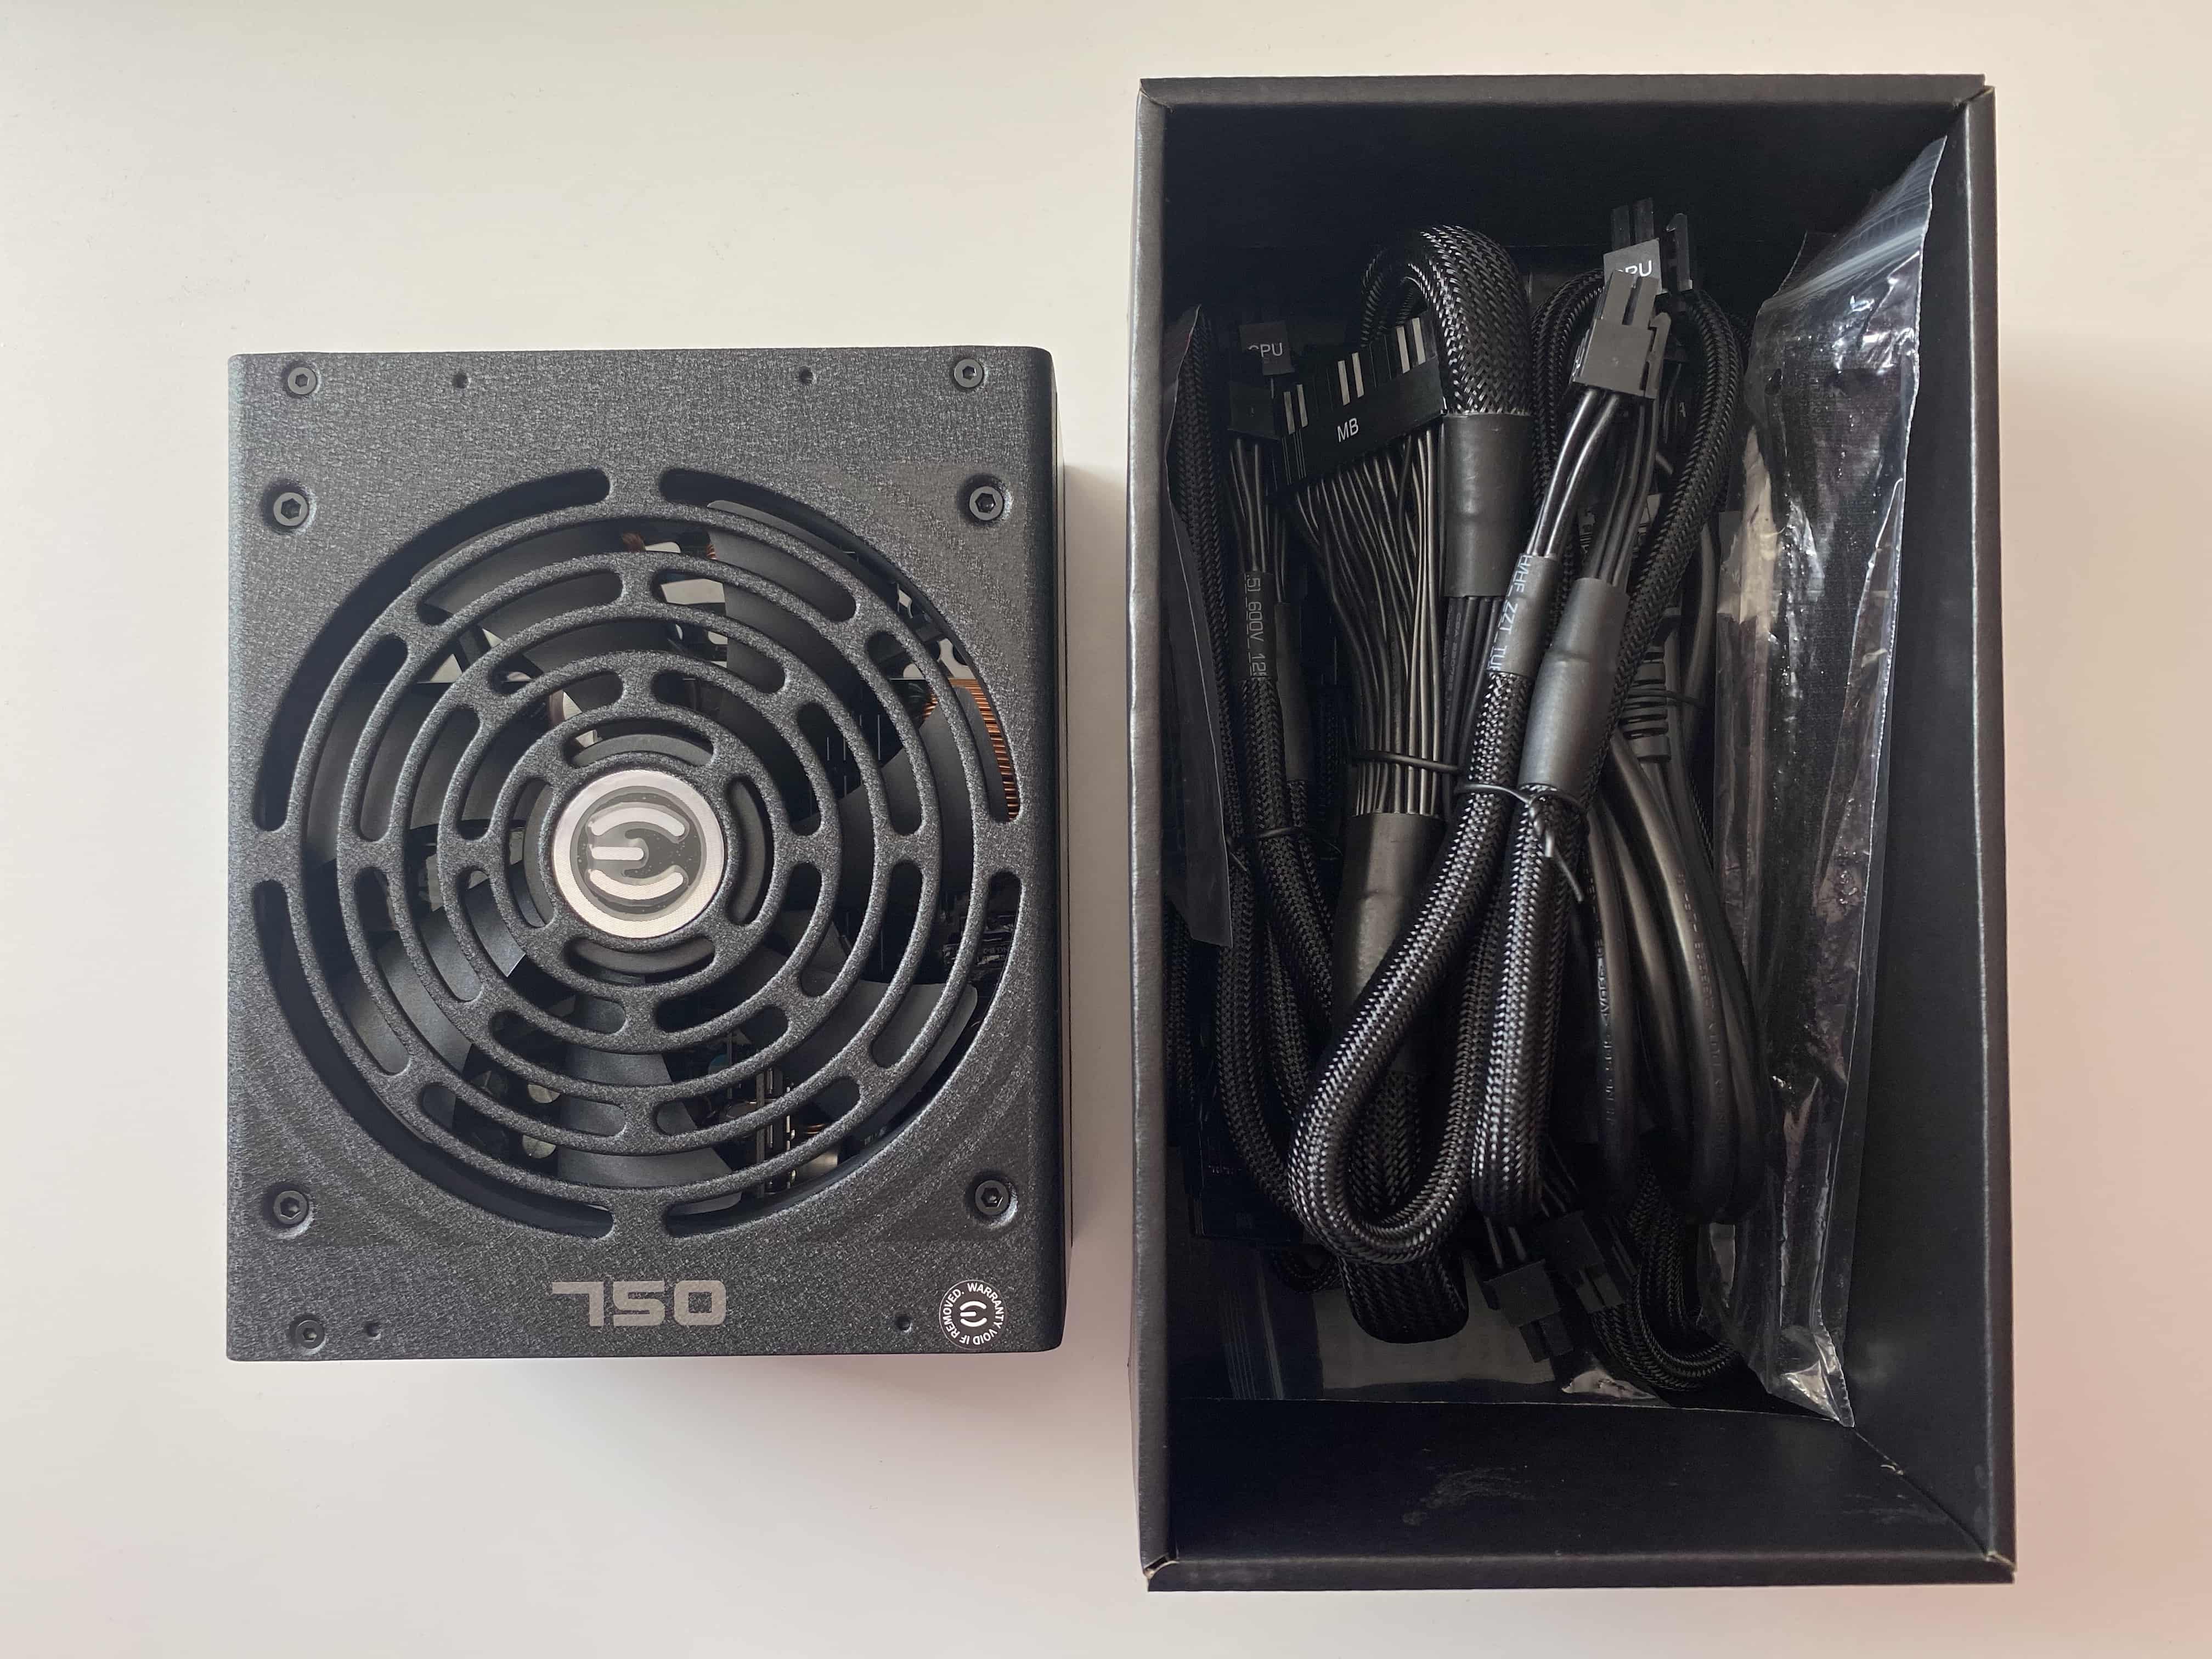 EVGA G2 750W Power Supply Unboxing